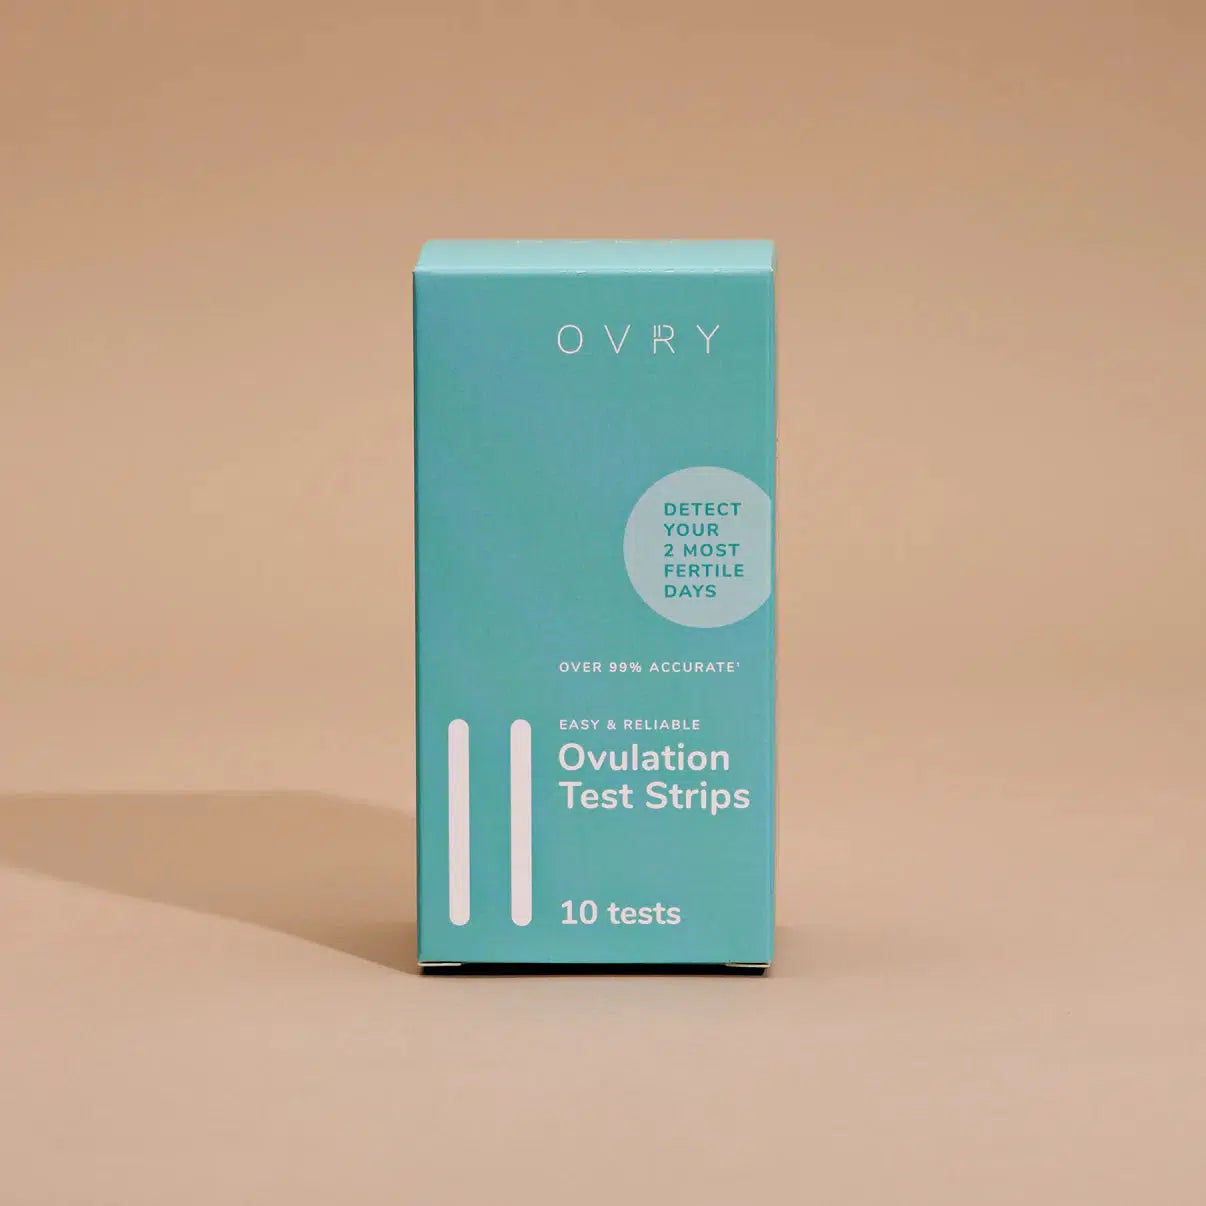 OVRY Ovulation Test Strips - 10 Units Personal Care Ovry Prettycleanshop